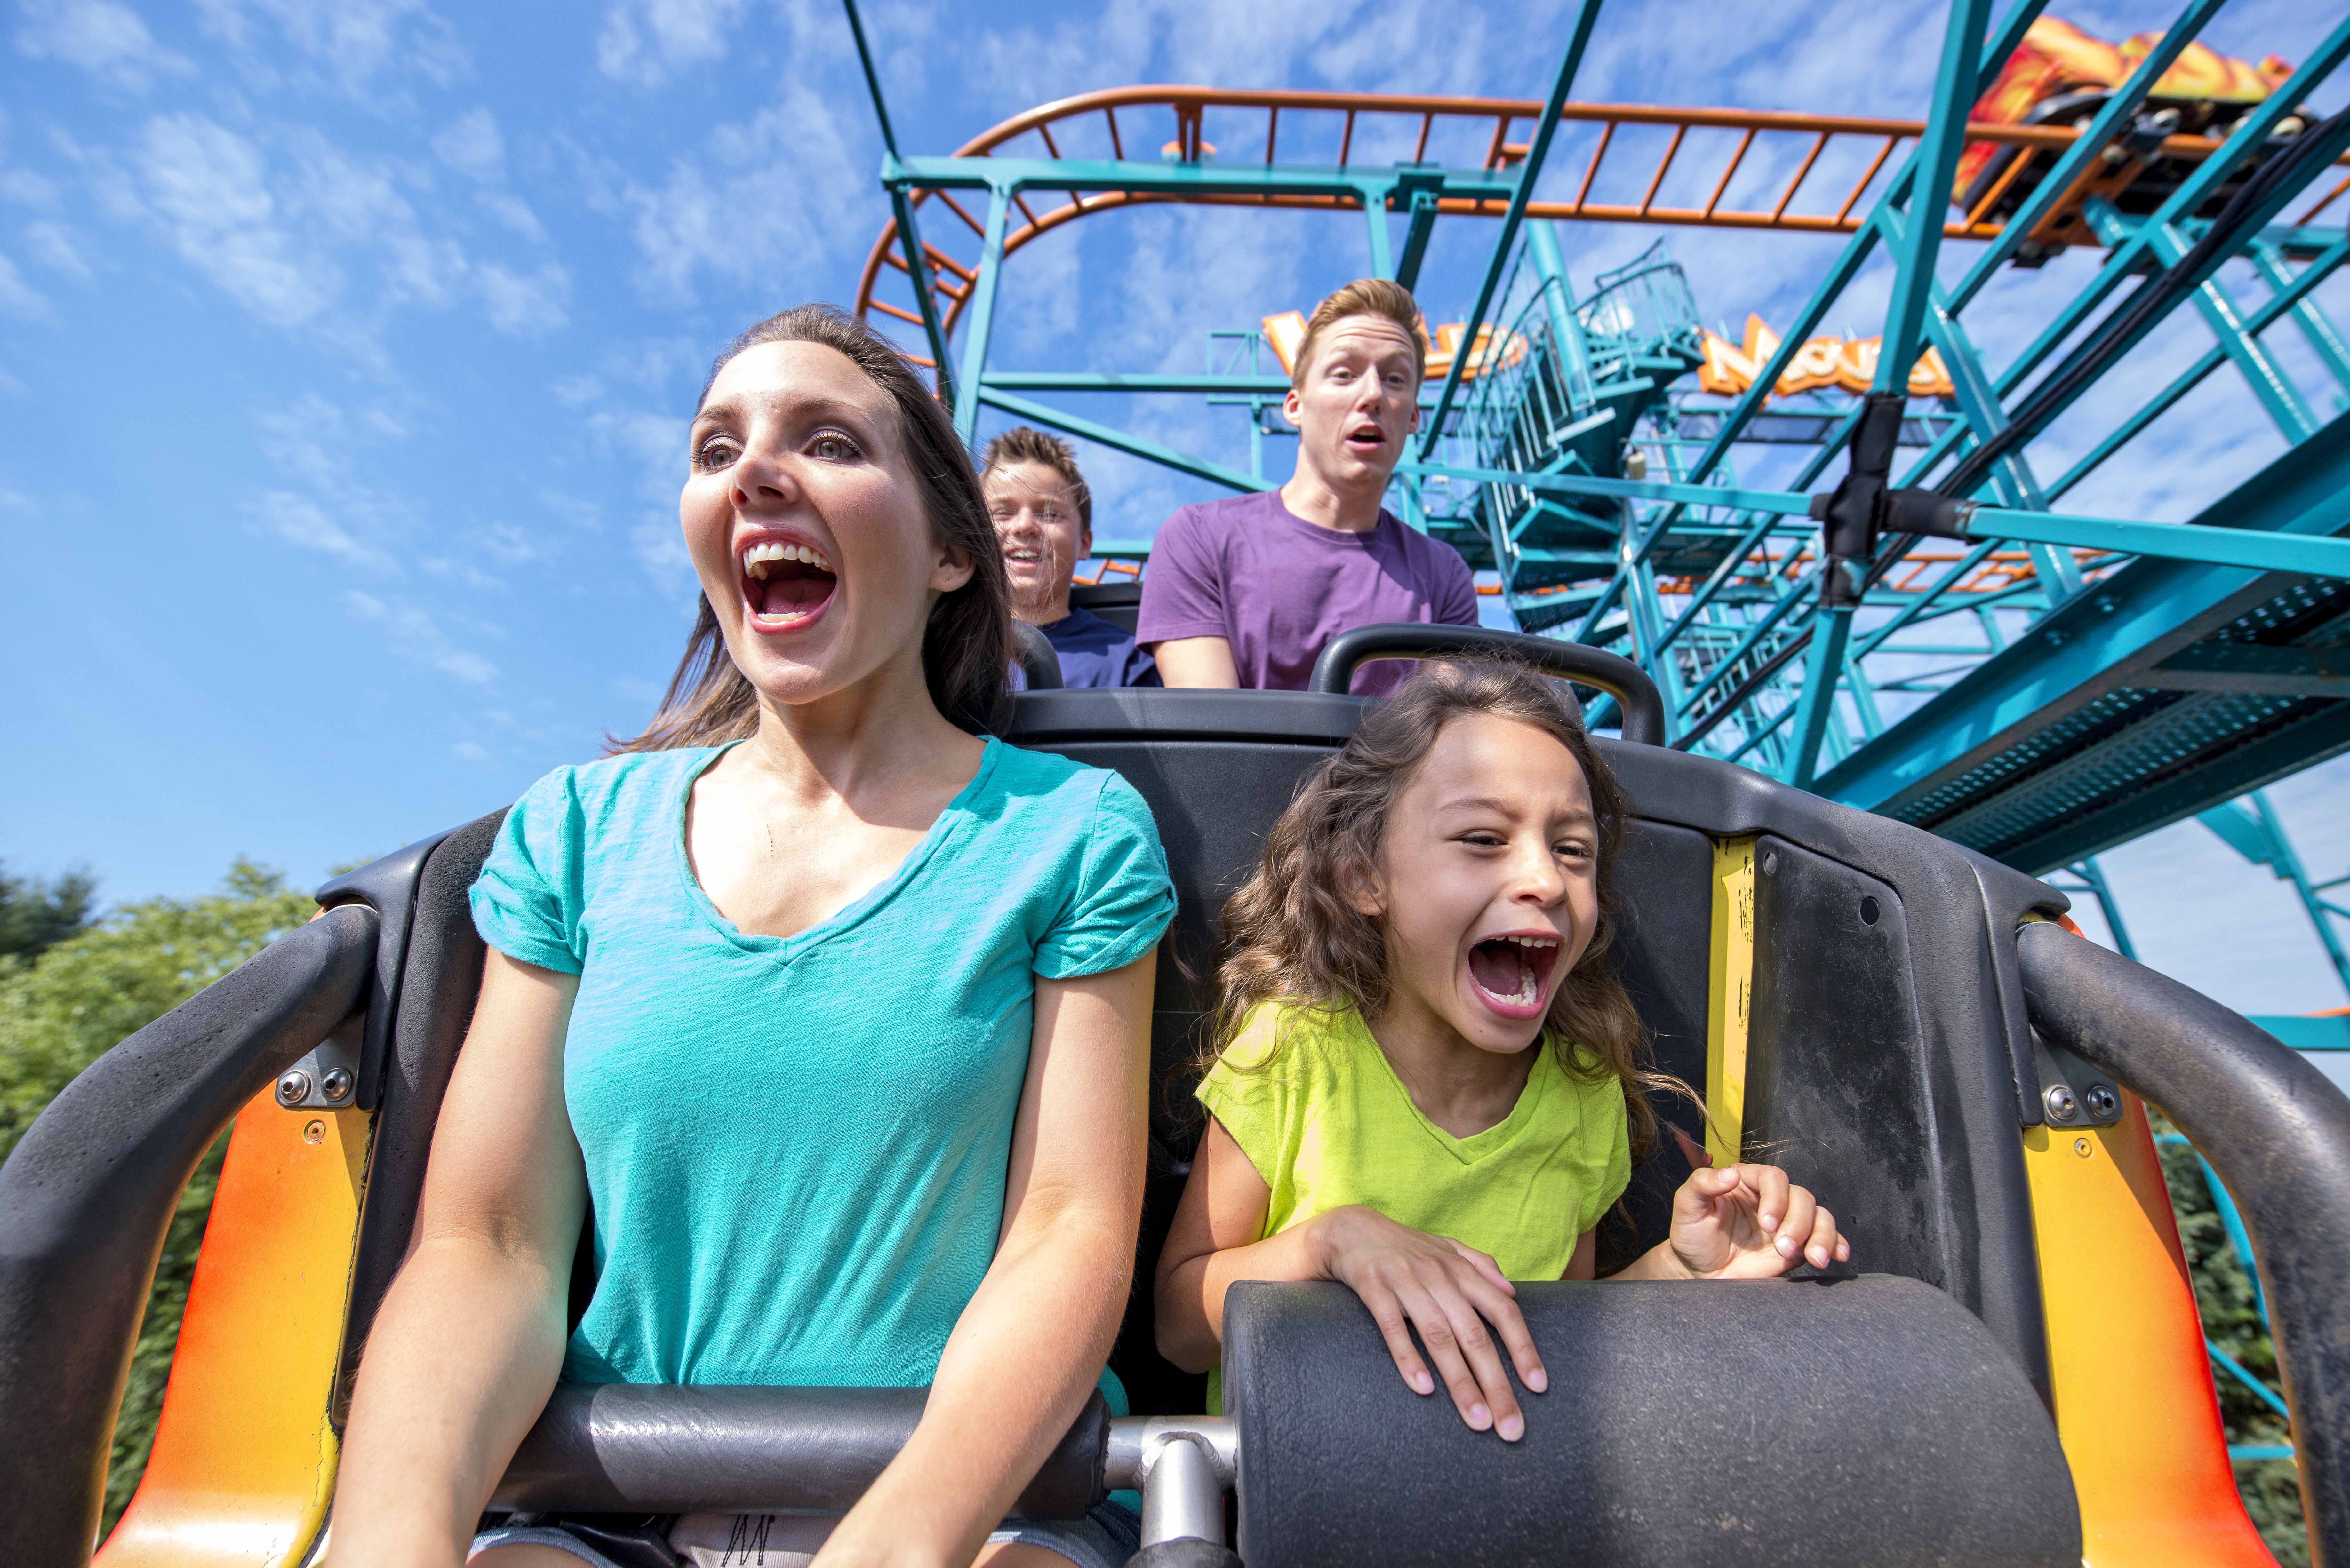 All six Dorney Park roller coasters (and then some), ranked 